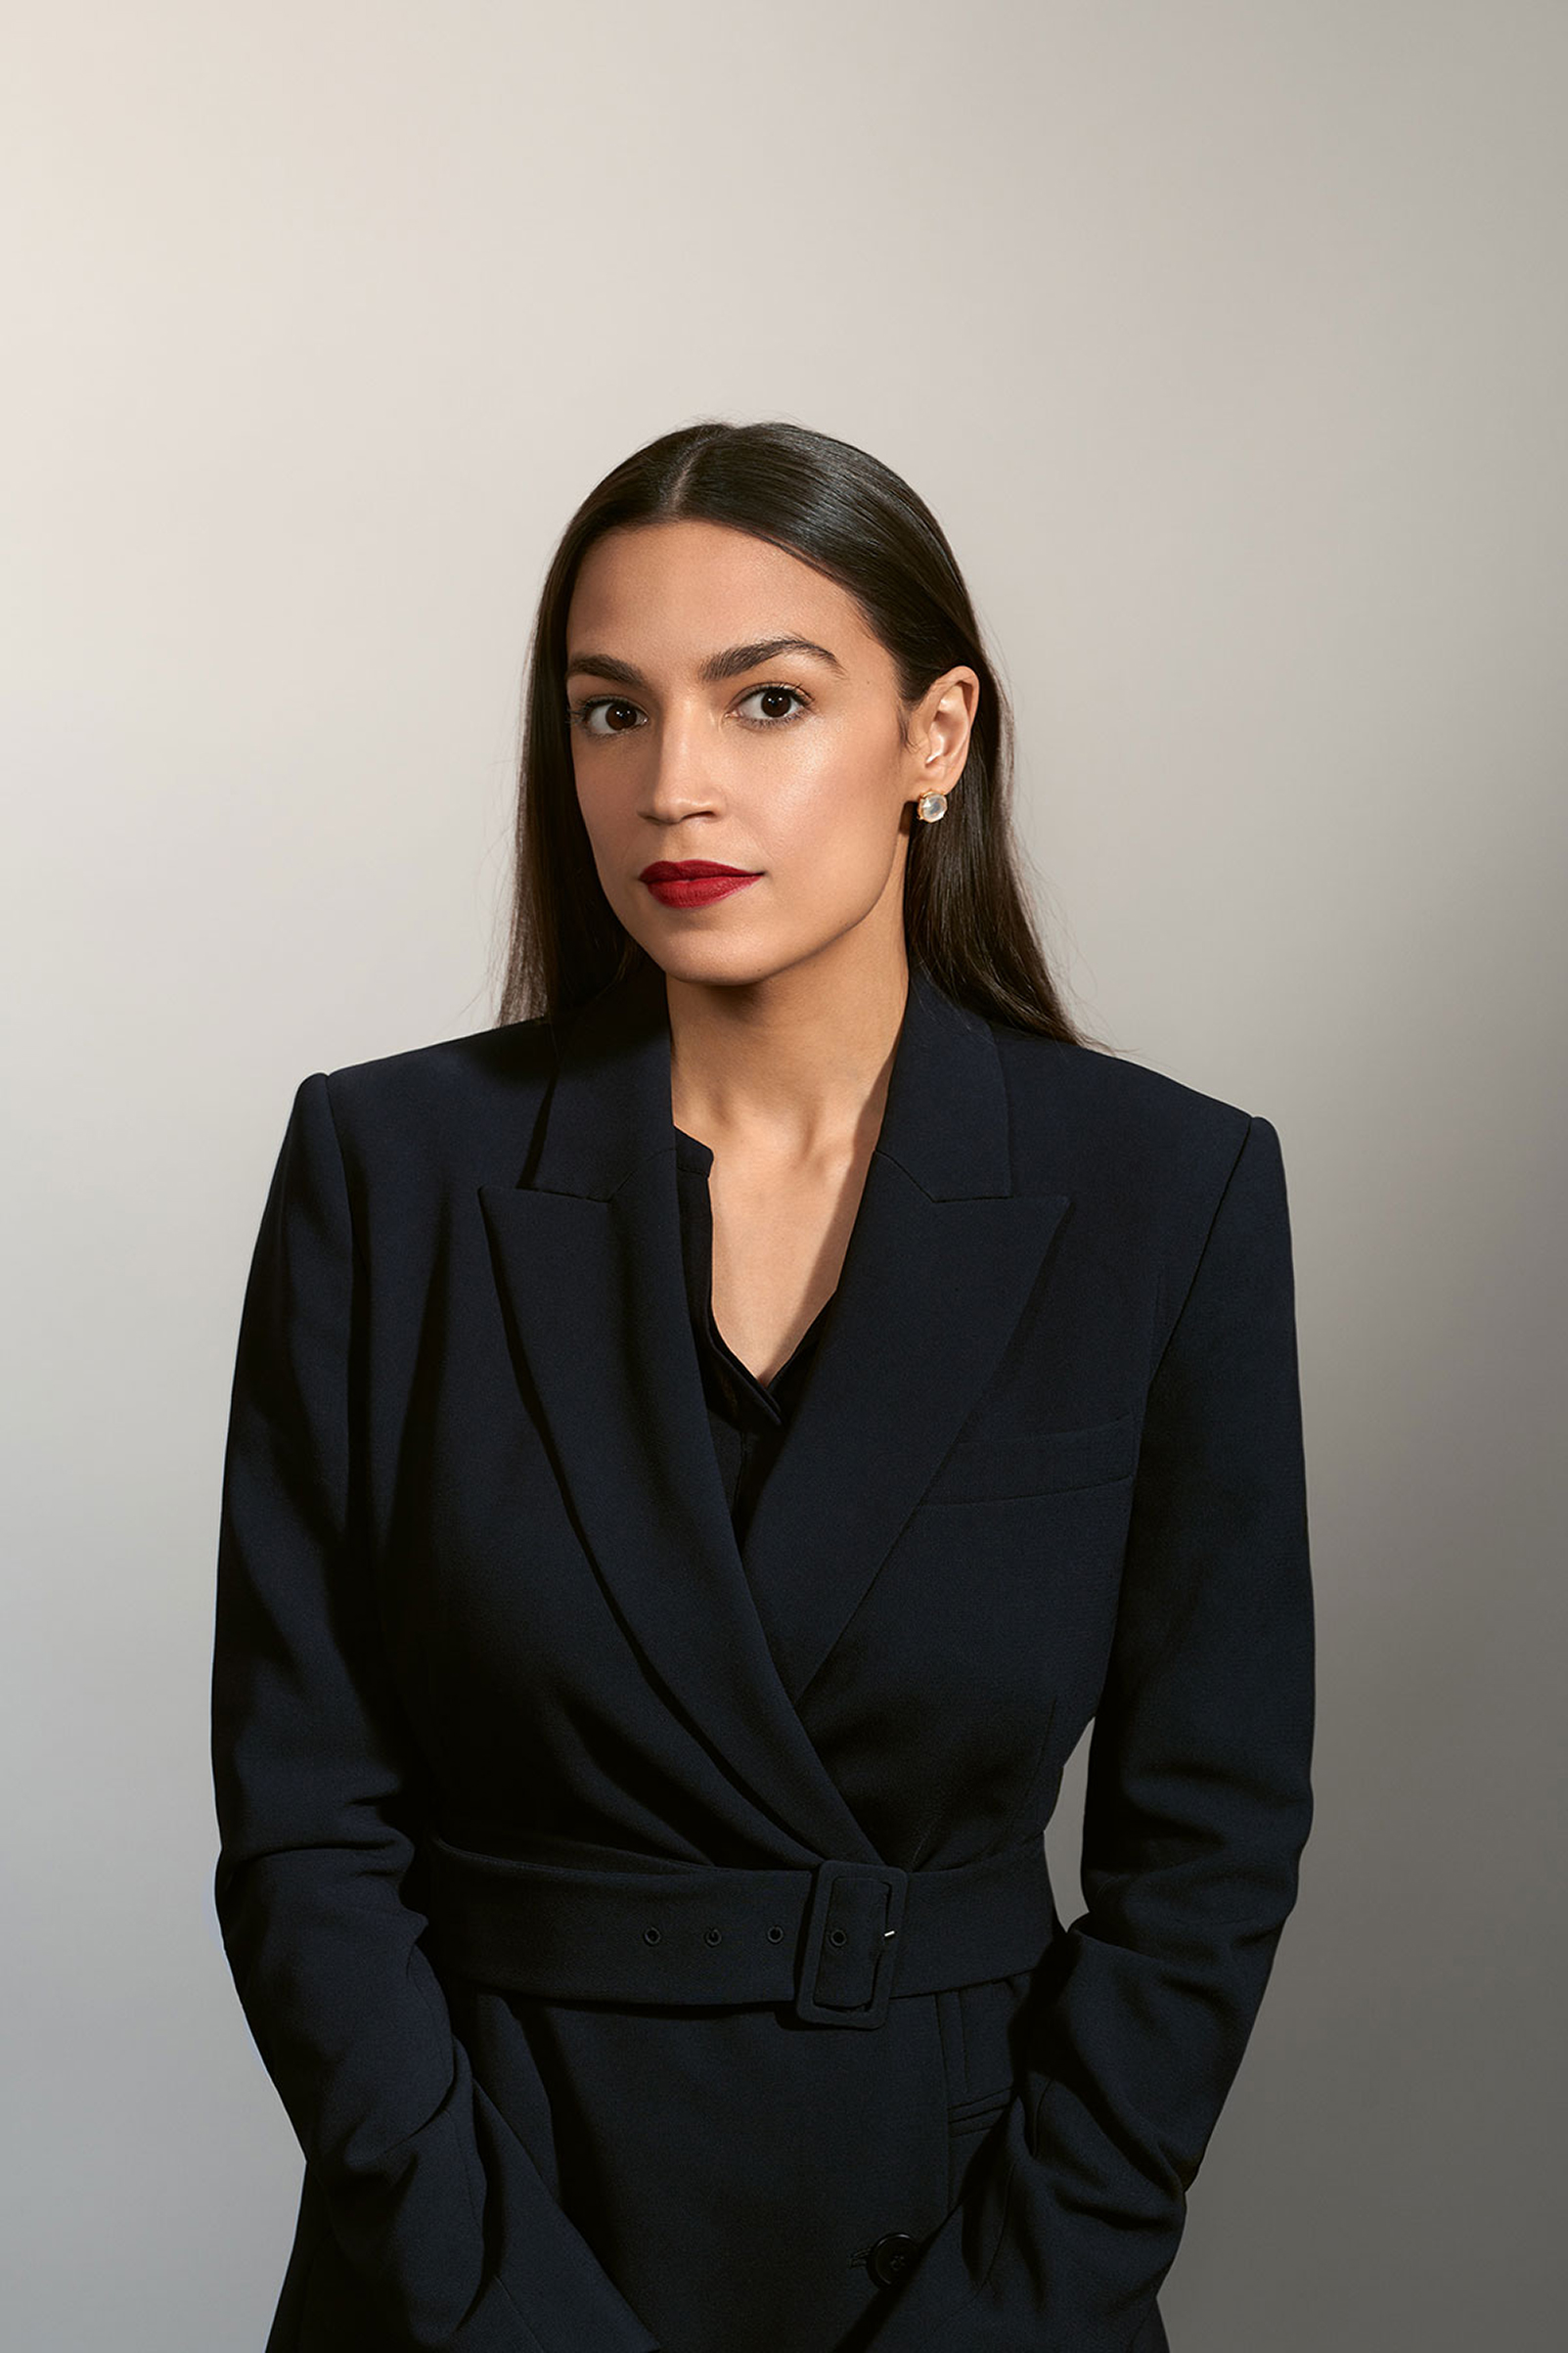 Rep. Alexandra Ocasio-Cortez. "TIME 100 Most Influential People," April 29 issue. (Collier Schorr for TIME)